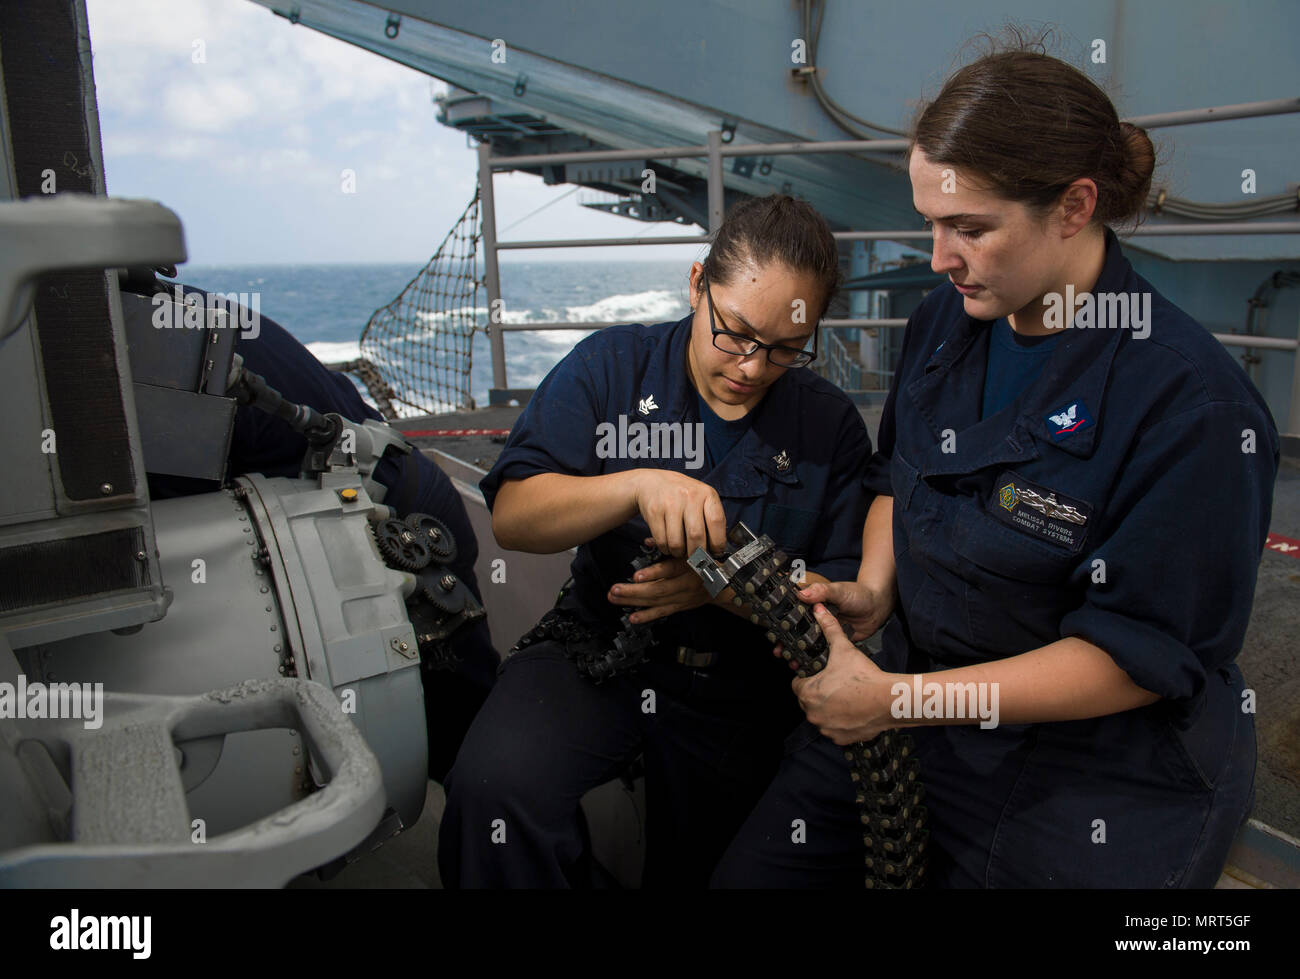 170624-N-TJ319-036  ATLANTIC OCEAN (June 24, 2017) Fire Controlman 2nd Class Harley Foskett, from San Antonio, Texas., and Fire Controlman 3rd Class Melissa Rivers, from Hot Springs, Ark., perform maintenance on a phalanx close-in weapon system aboard the aircraft carrier USS Dwight D. Eisenhower (CVN 69)(Ike). Ike is underway during the sustainment phase of the Optimized Fleet Response Plan (OFRP). (U.S. Navy photo by Mass Communication Specialist Seaman Jessica L. Dowell) Stock Photo